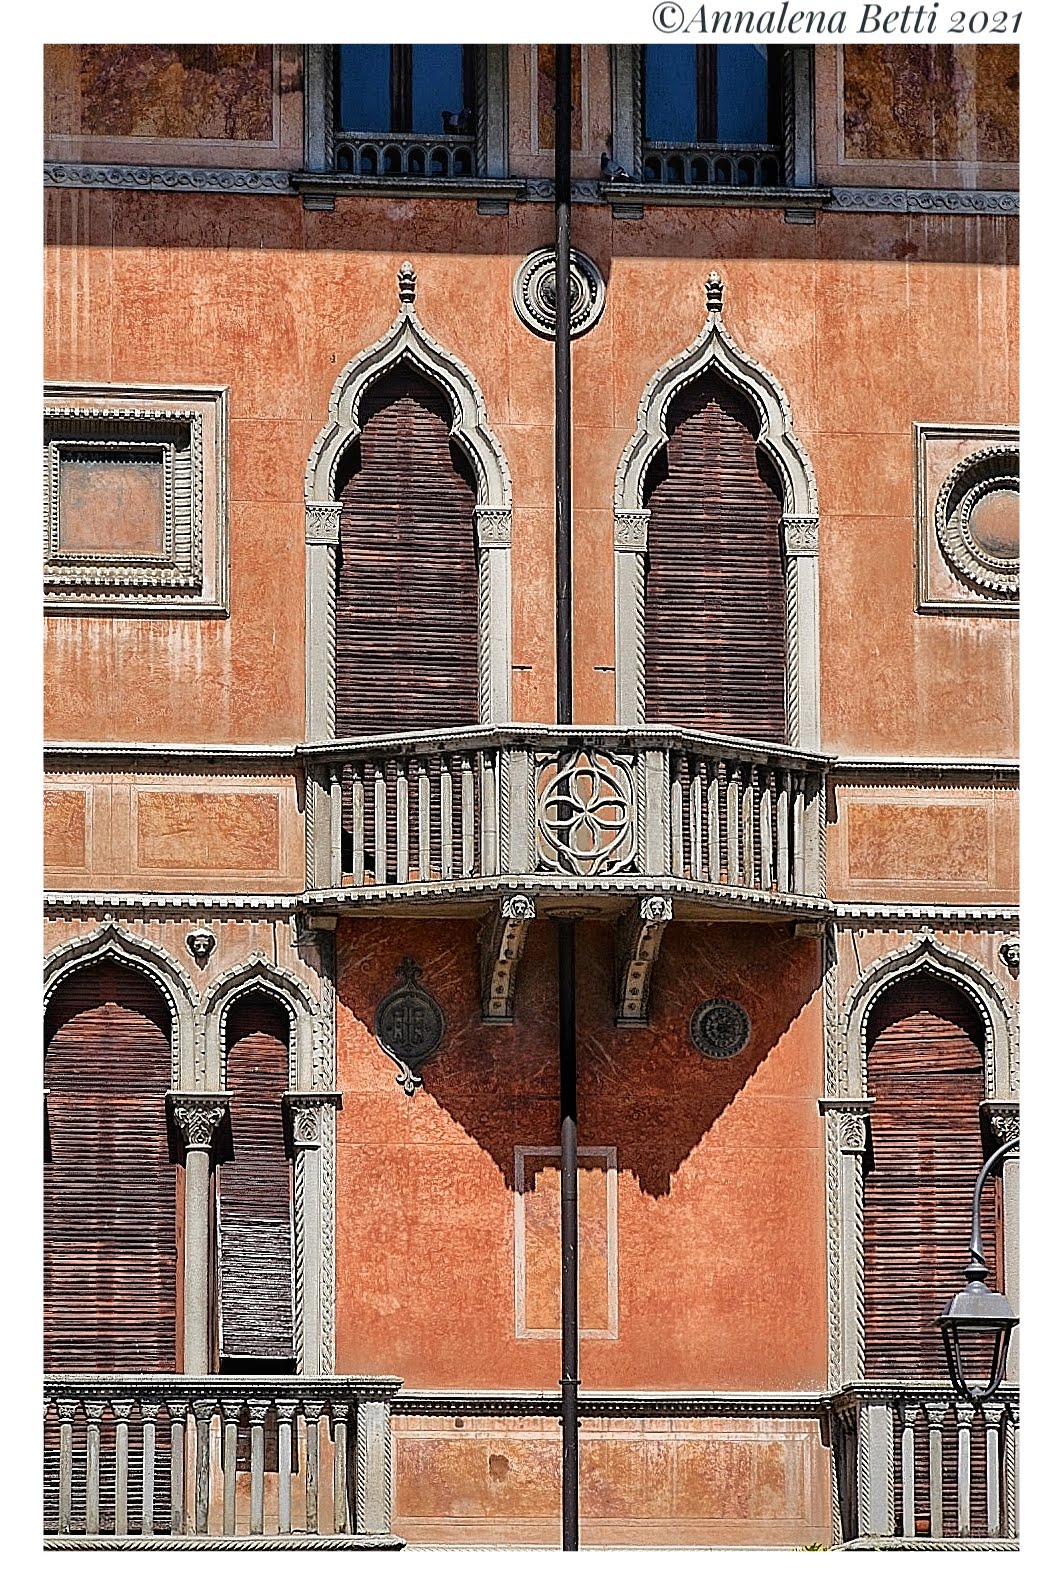 An ancient Venetian-style palace in Desenzano...